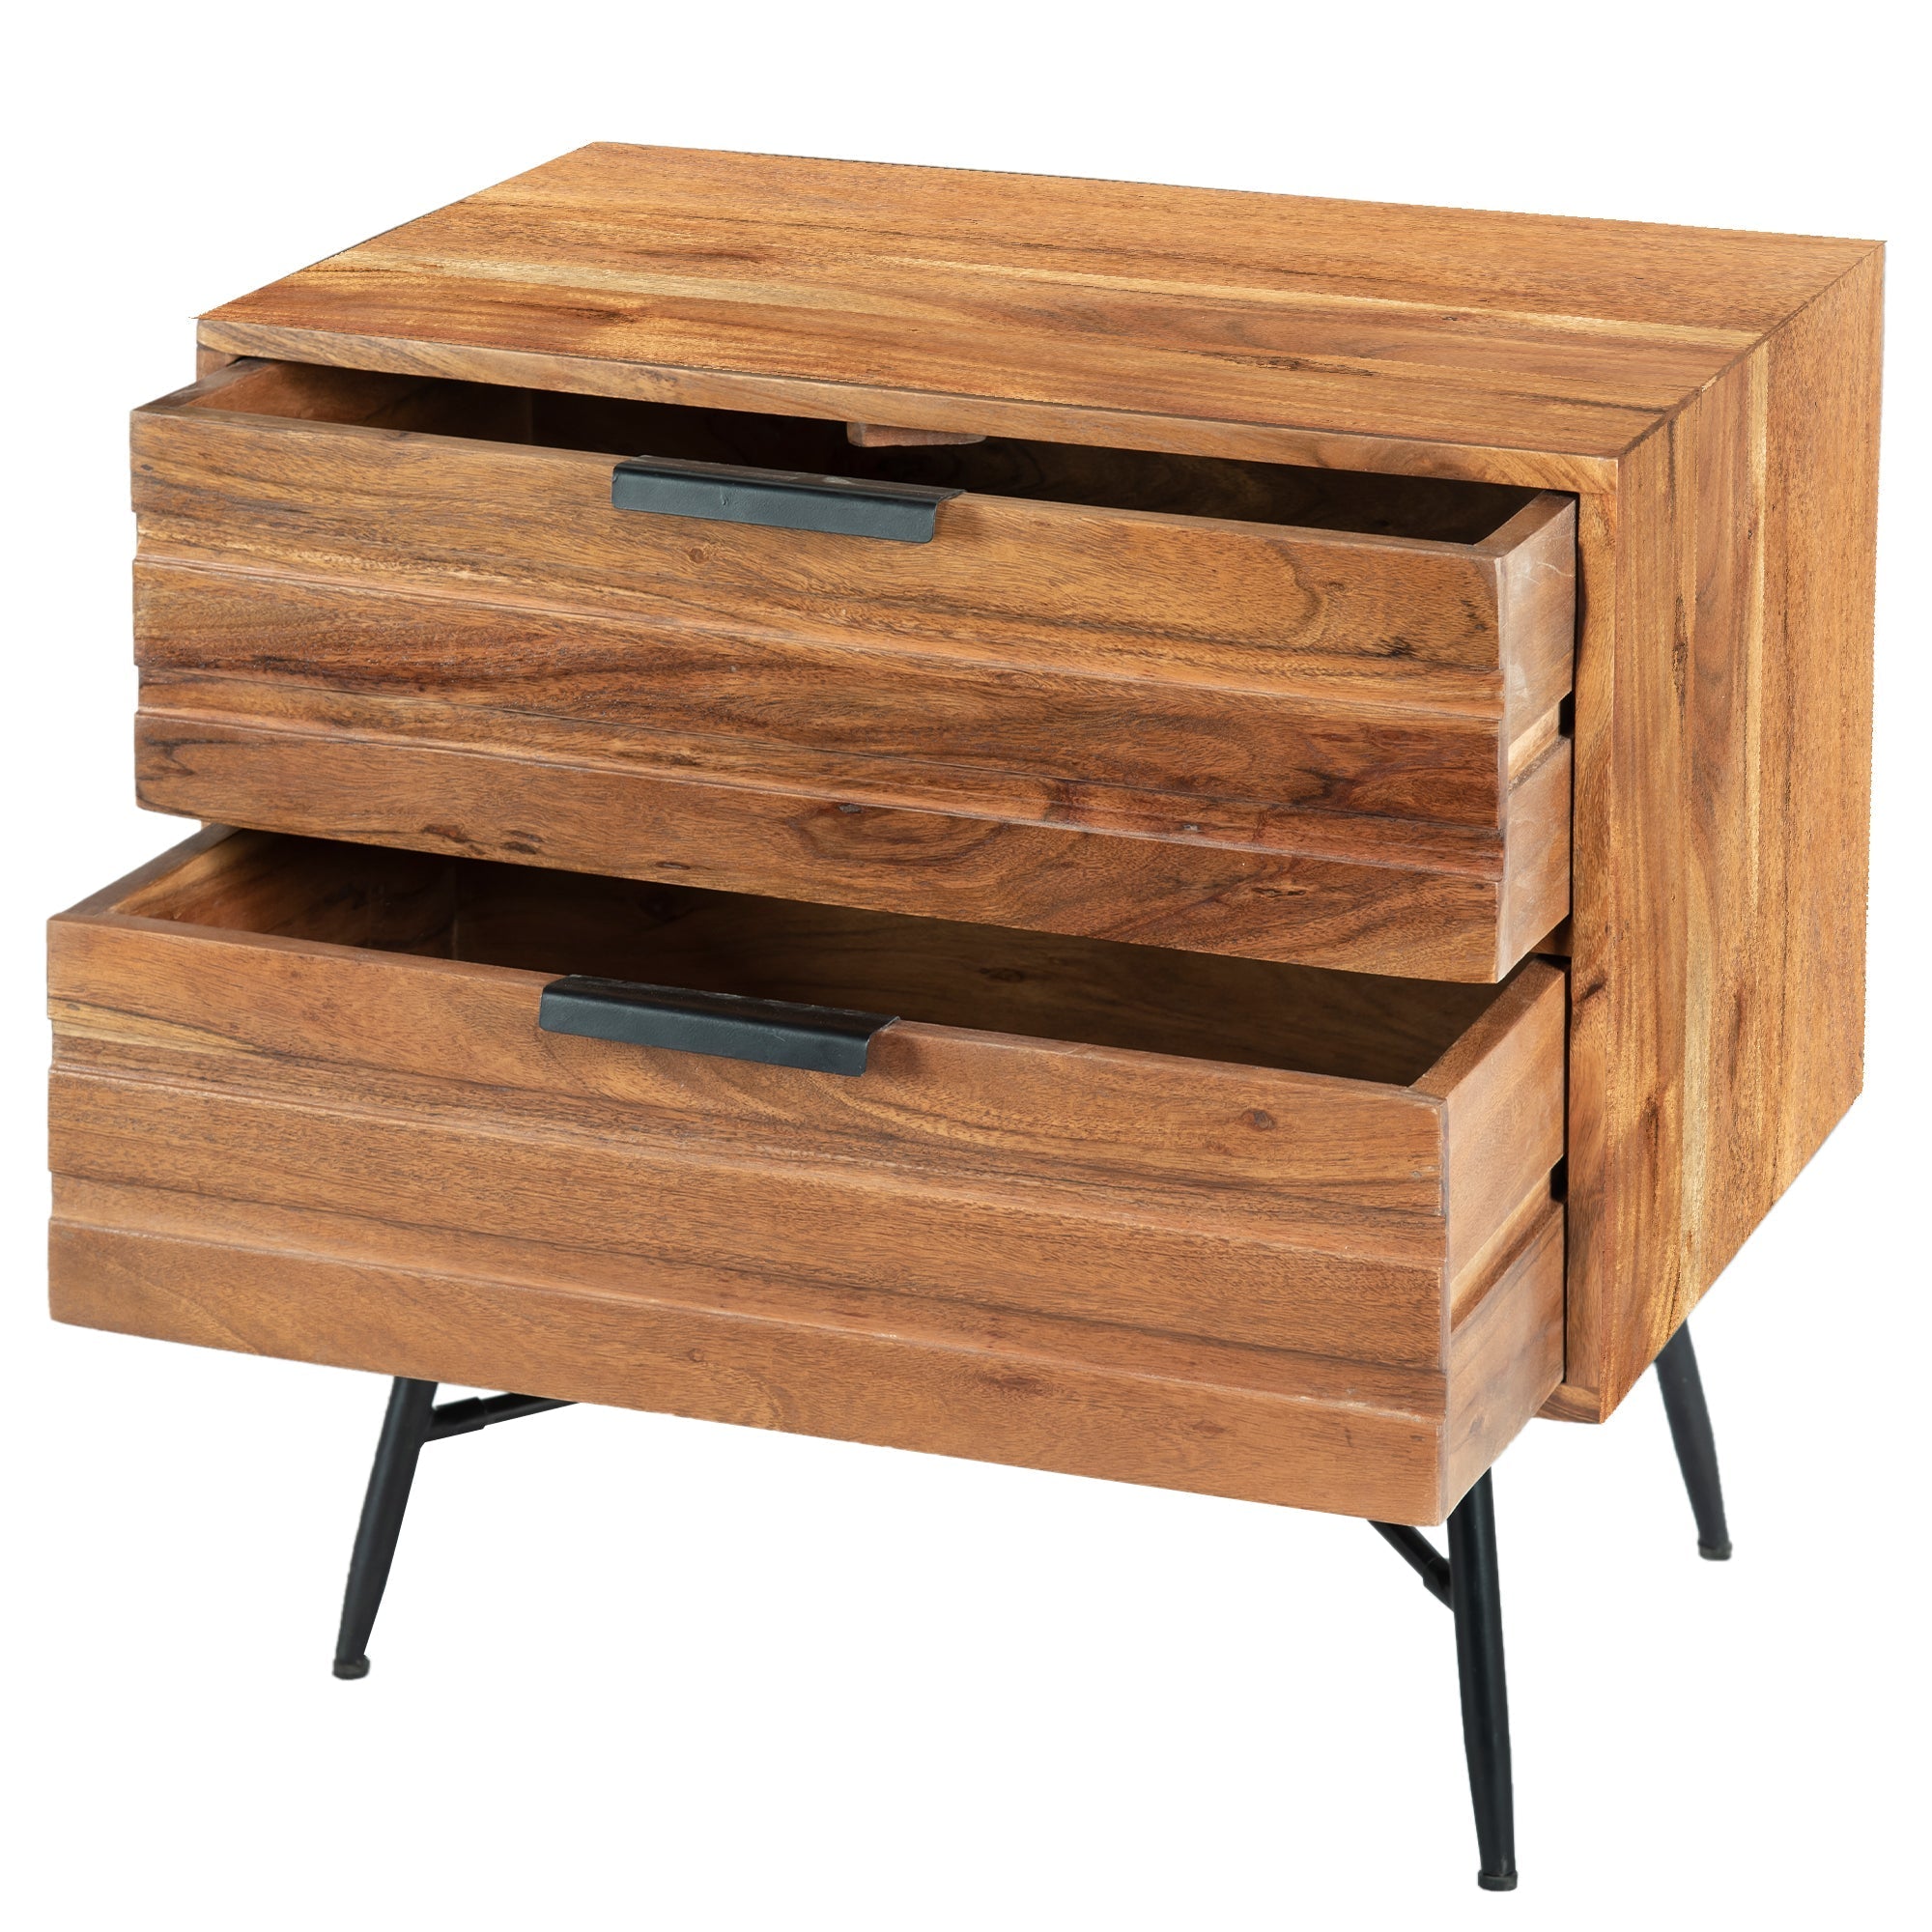 Benzara UPT-195128 2 Drawer Wooden Nightstand with Metal Angled Legs